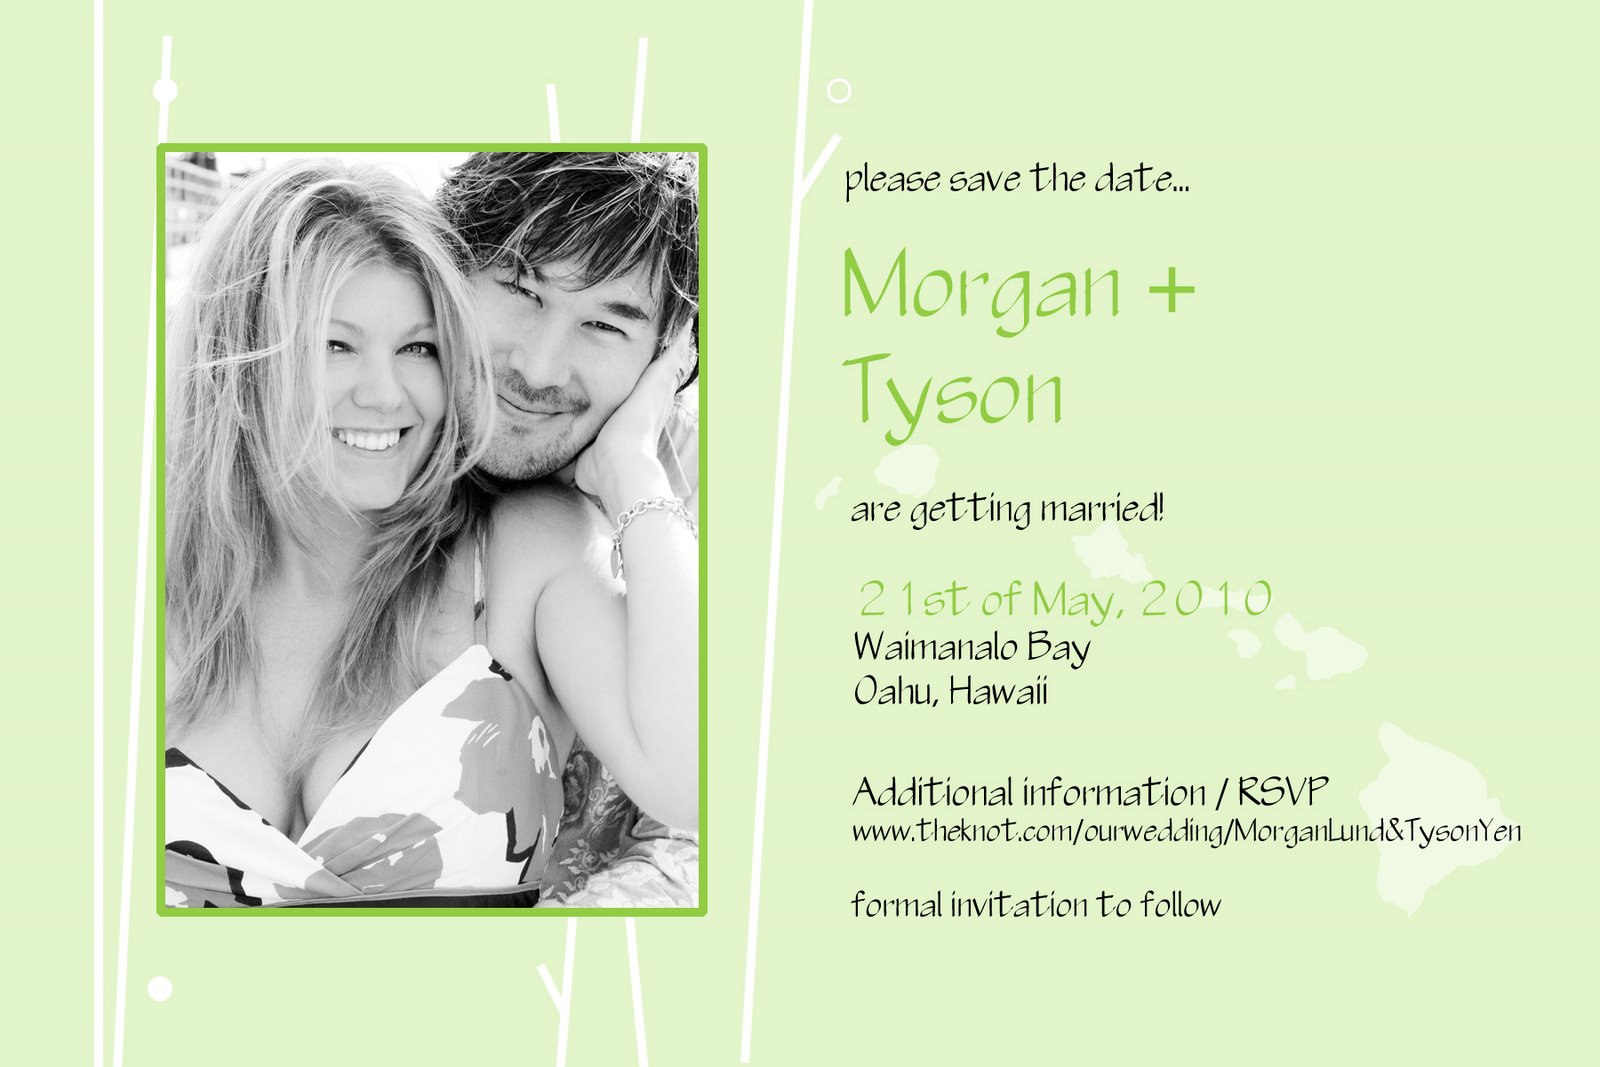 [Morgan+and+Tyson's+-+Save+the+Date_ML.jpg]